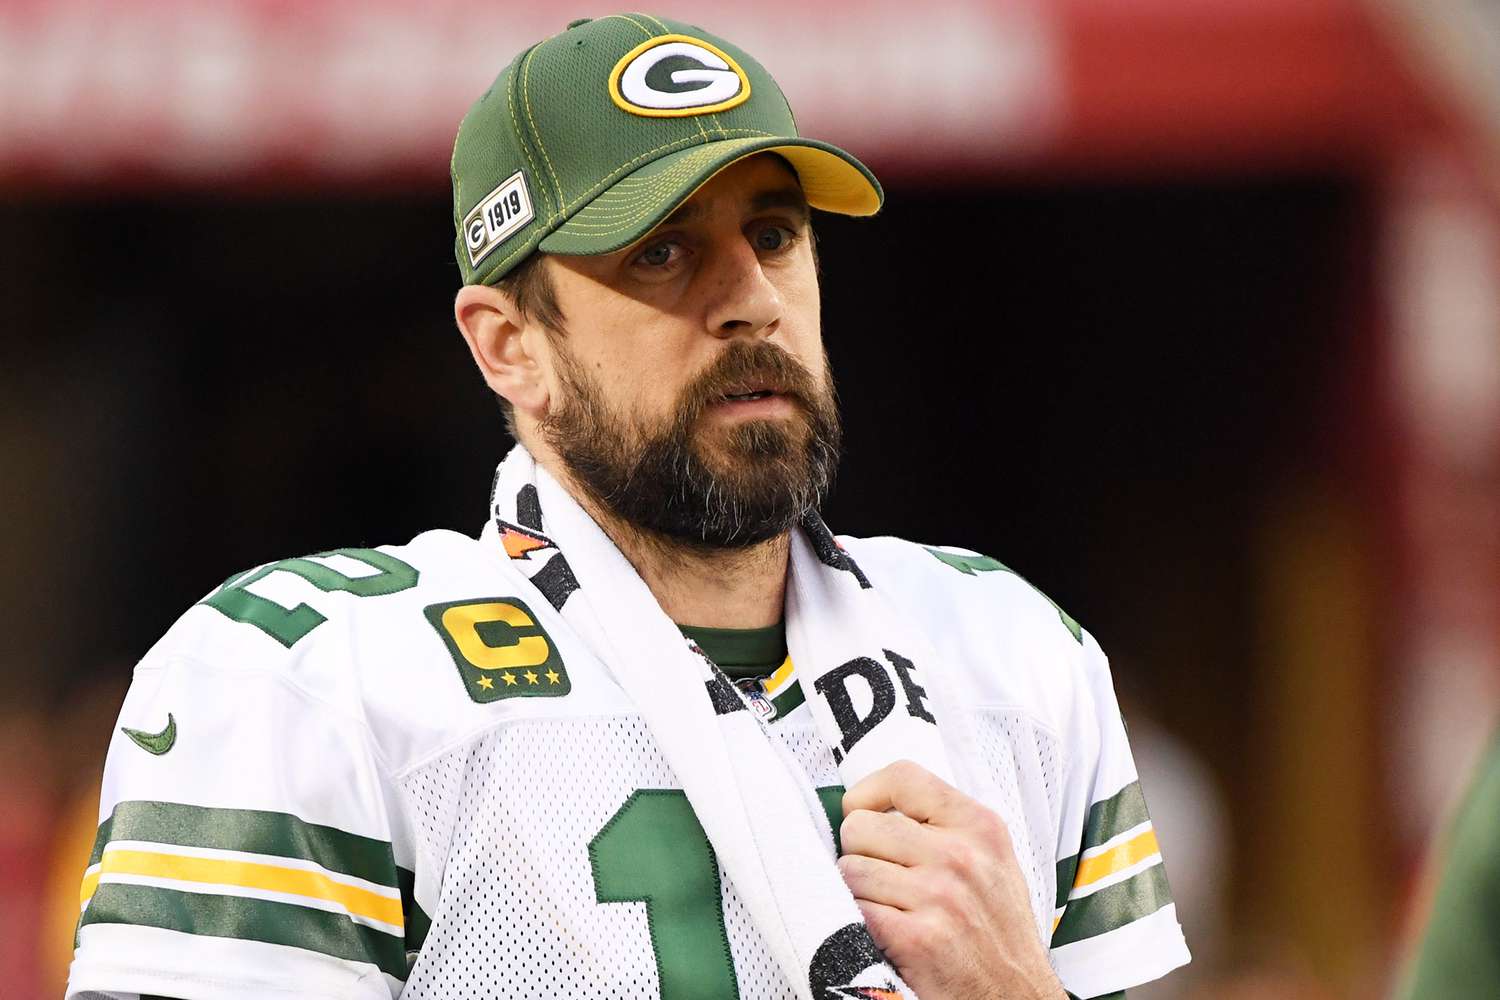 Aaron Rodgers' Path to NFL Greatness: A Potential Historic Turn with the New York Jets